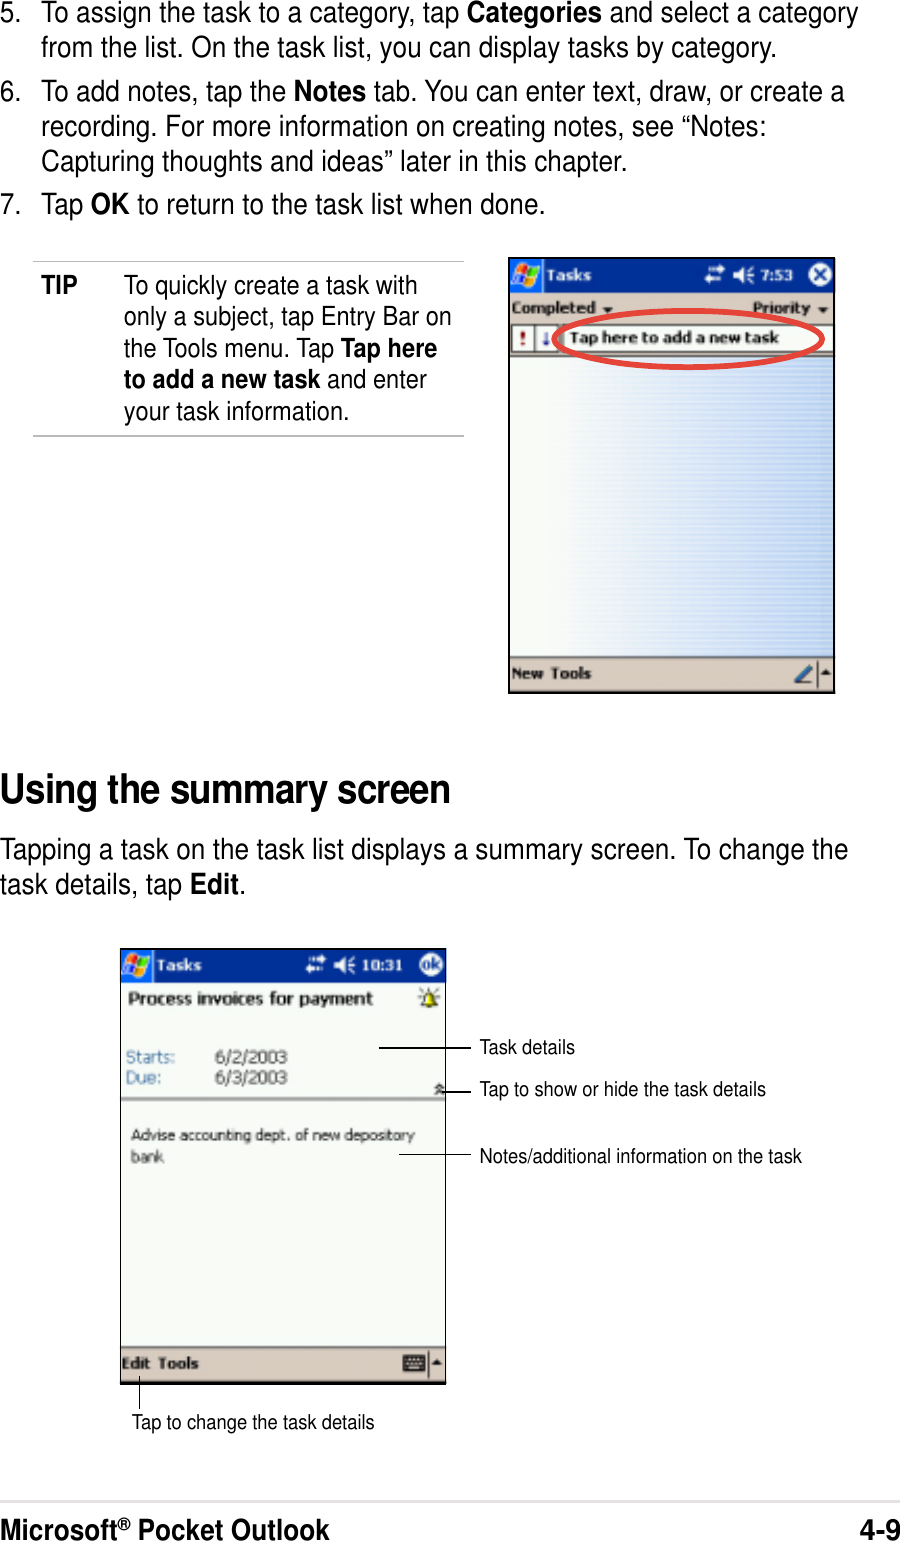 Microsoft® Pocket Outlook4-95. To assign the task to a category, tap Categories and select a categoryfrom the list. On the task list, you can display tasks by category.6. To add notes, tap the Notes tab. You can enter text, draw, or create arecording. For more information on creating notes, see “Notes:Capturing thoughts and ideas” later in this chapter.7. Tap OK to return to the task list when done.Using the summary screenTapping a task on the task list displays a summary screen. To change thetask details, tap Edit.TIP To quickly create a task withonly a subject, tap Entry Bar onthe Tools menu. Tap Tap hereto add a new task and enteryour task information.Task detailsTap to show or hide the task detailsNotes/additional information on the taskTap to change the task details